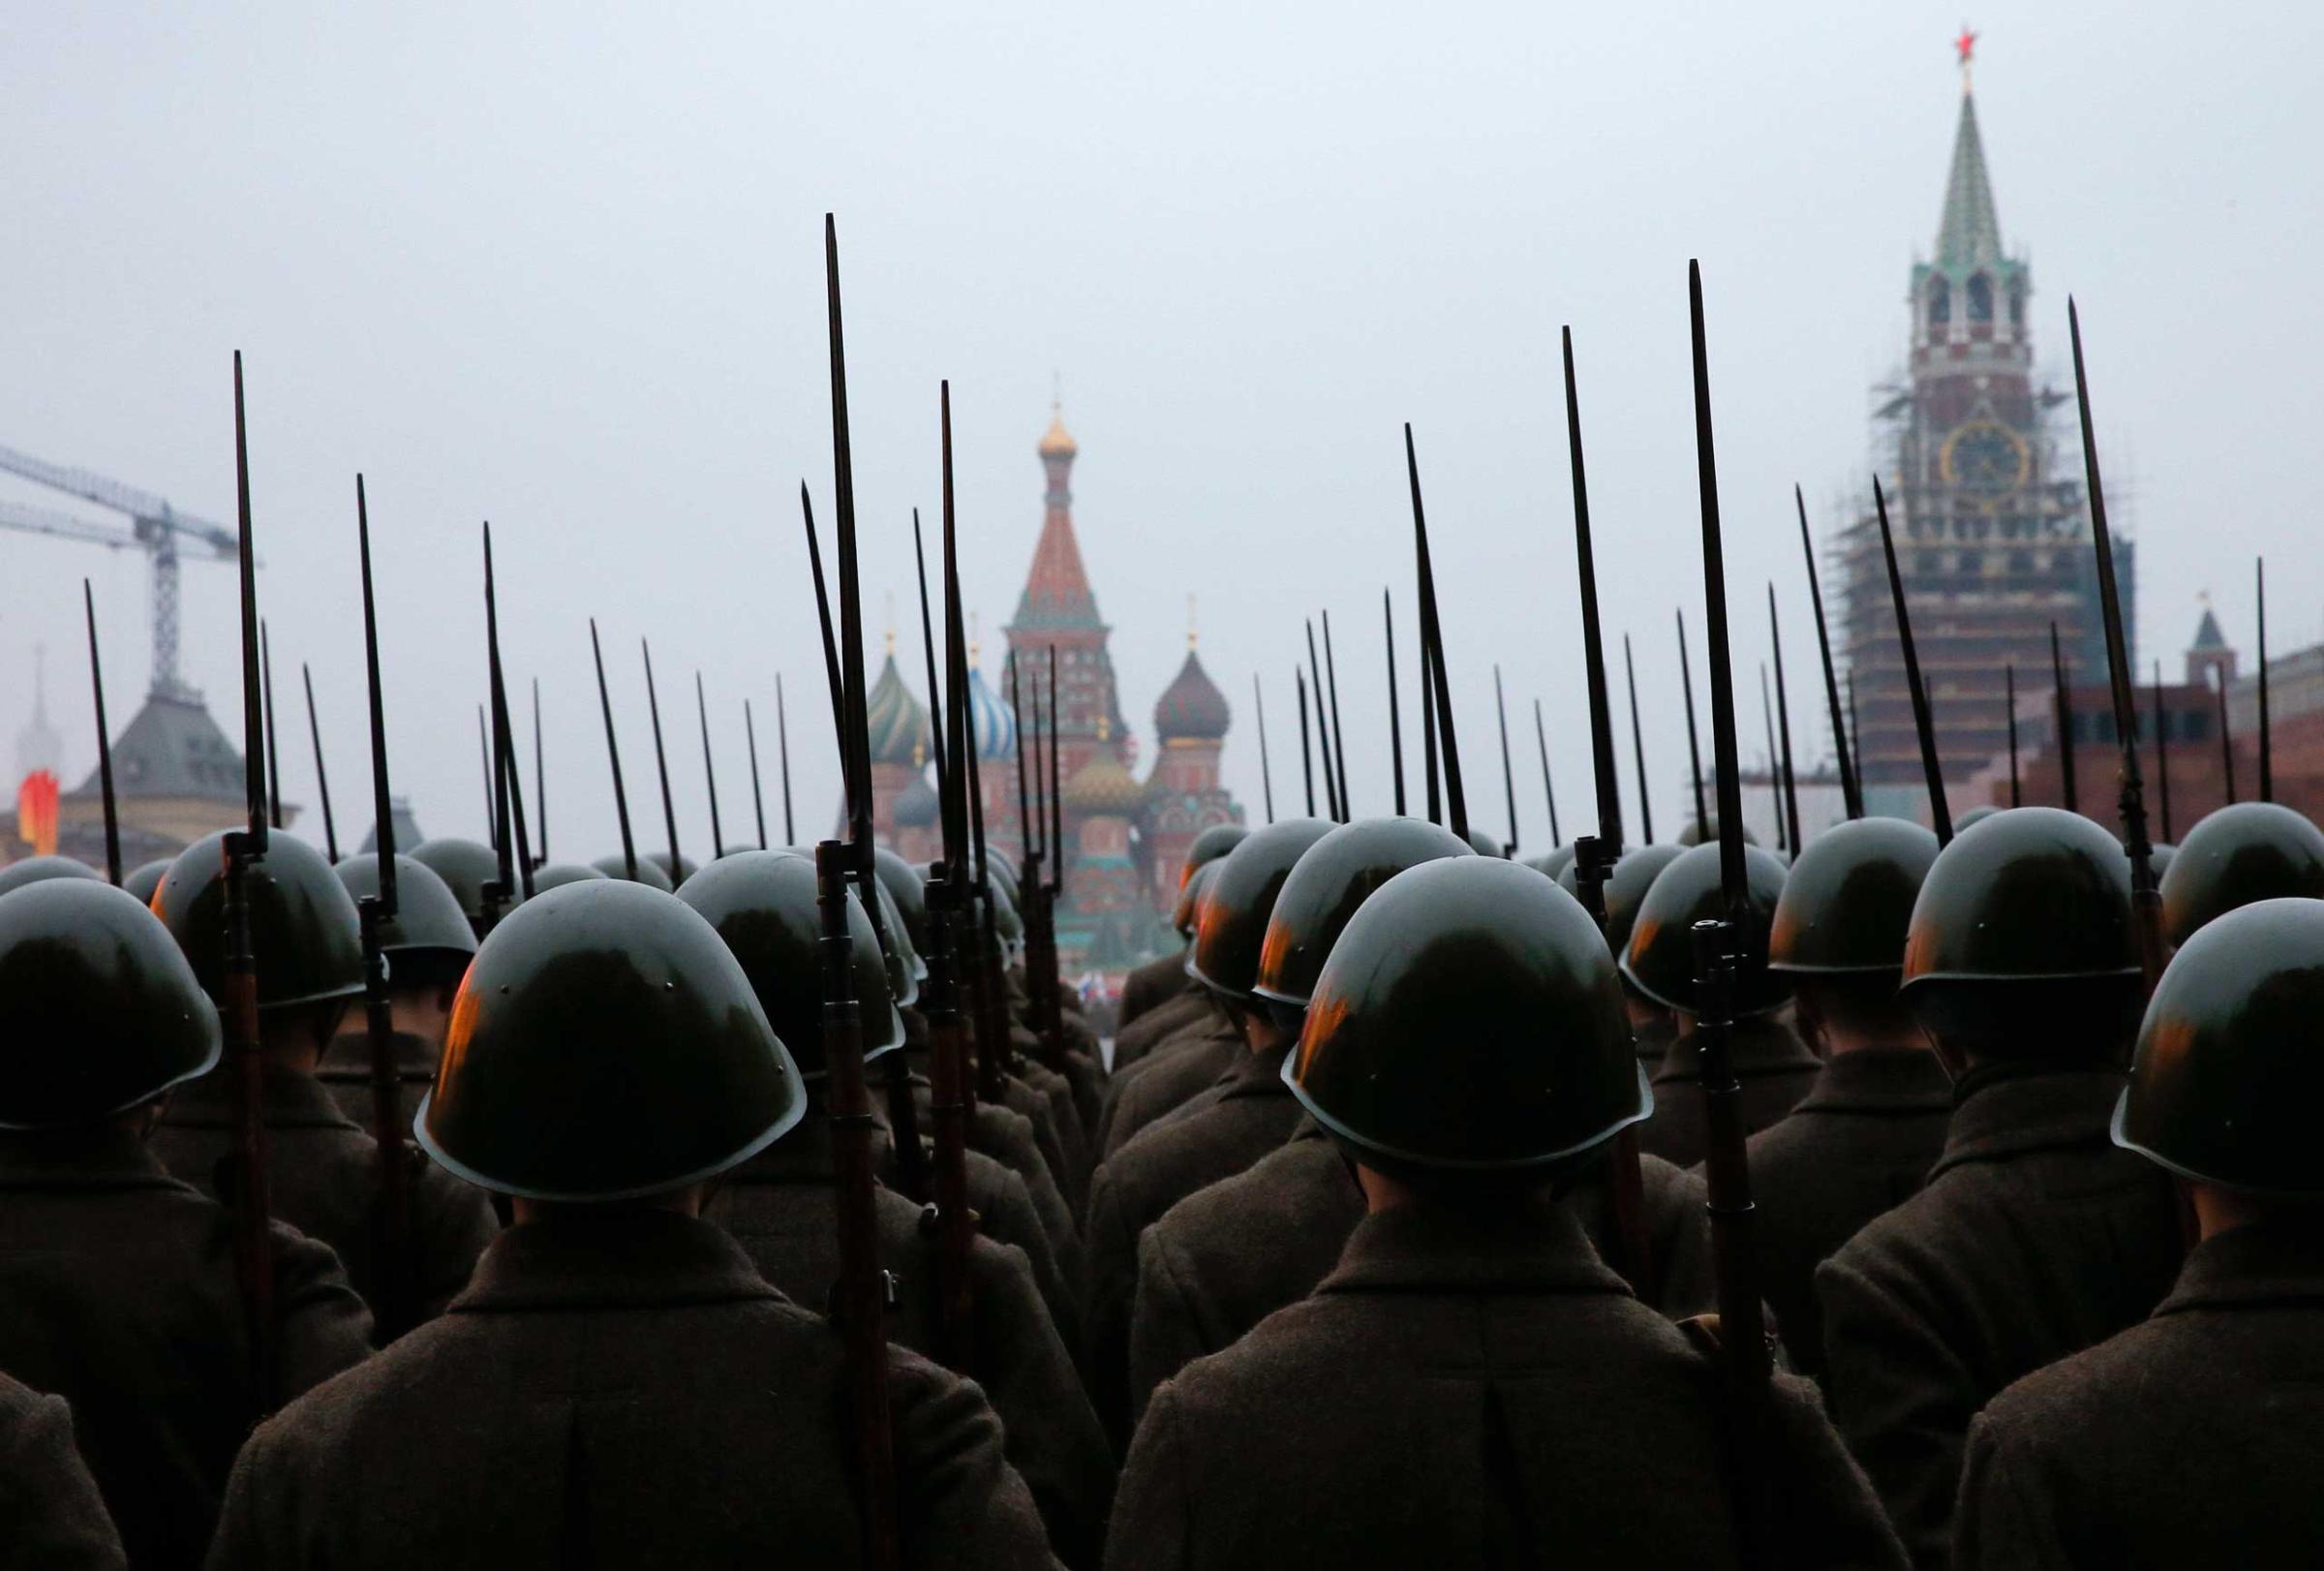 Russian servicemen dressed in historical uniforms take part in a rehearsal for a military parade at the Red Square in Moscow